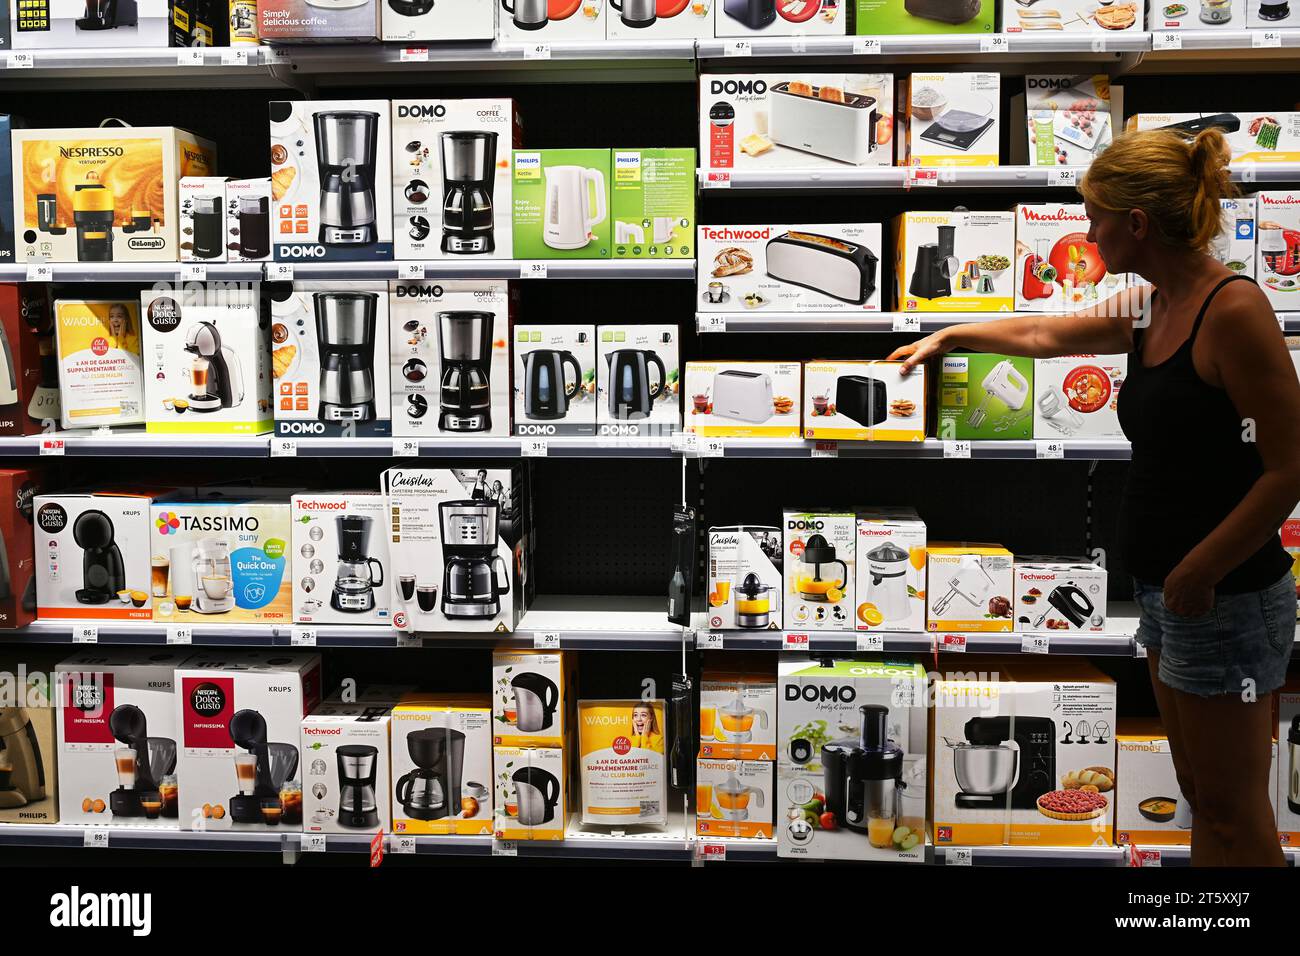 Electrical Home Appliances for sale in a store Stock Photo